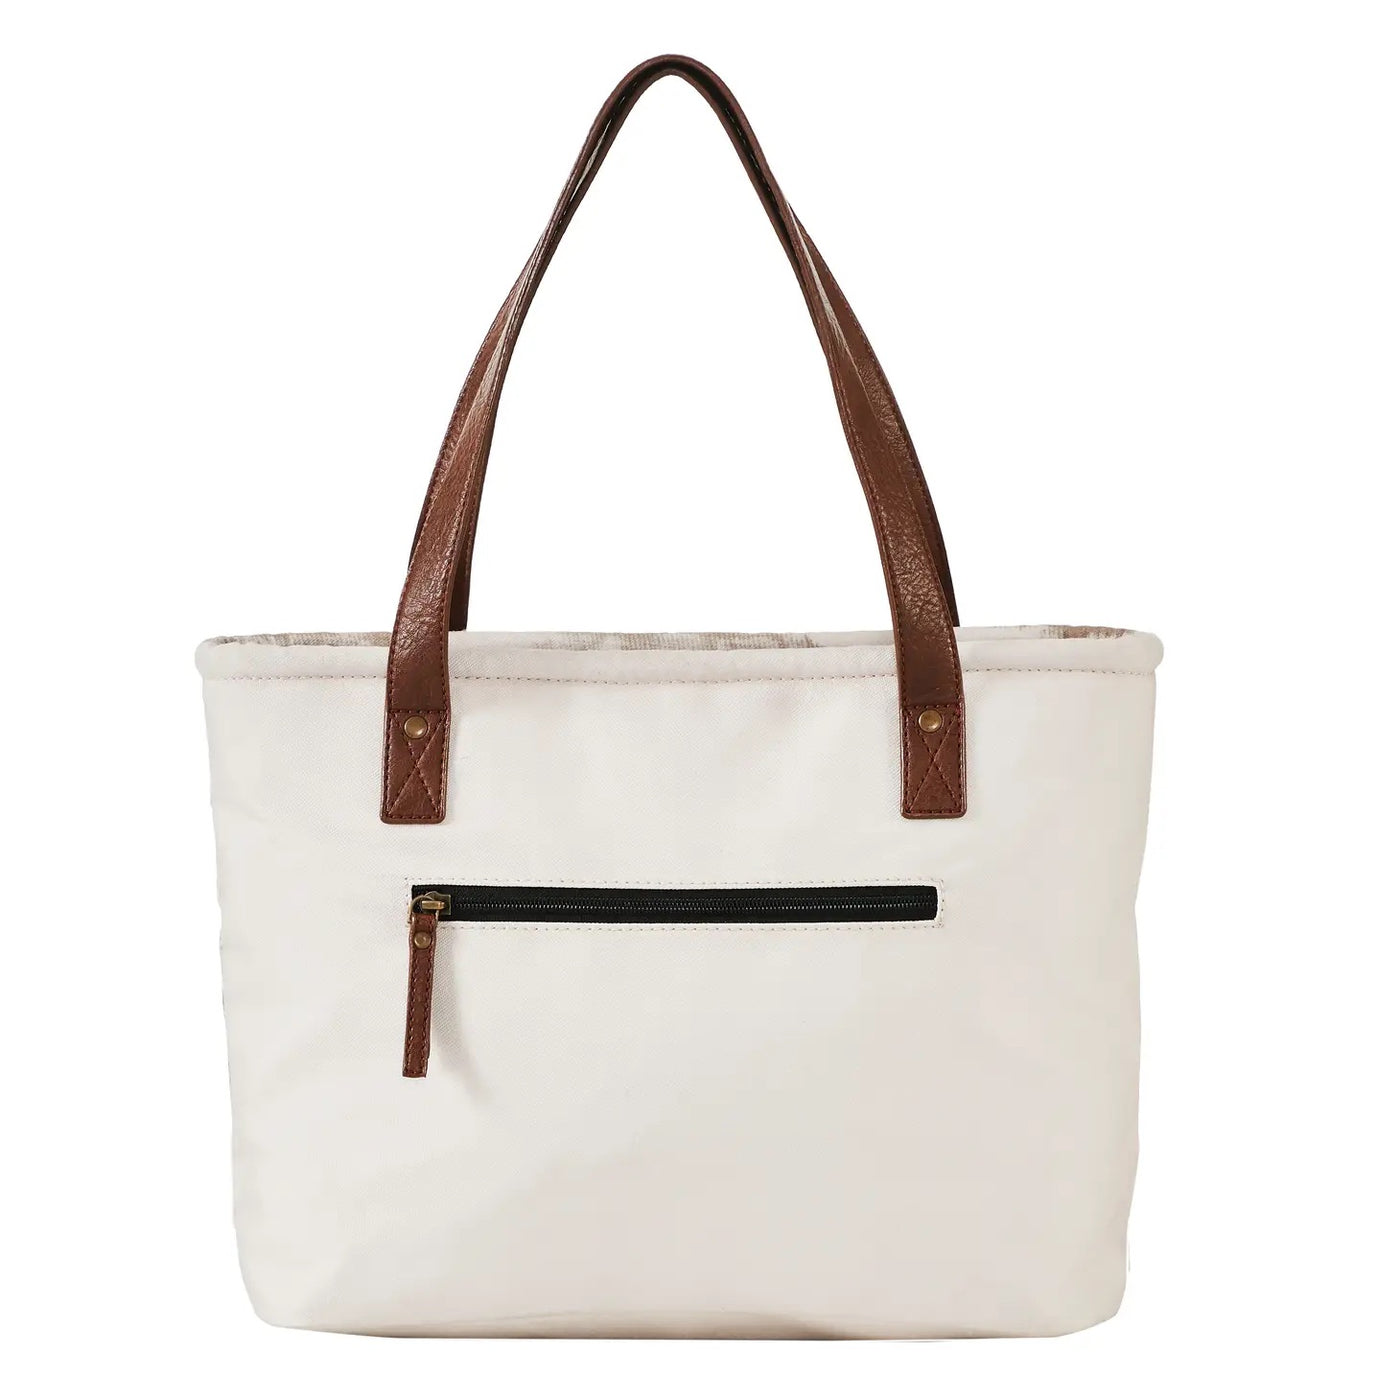 Clay Tote